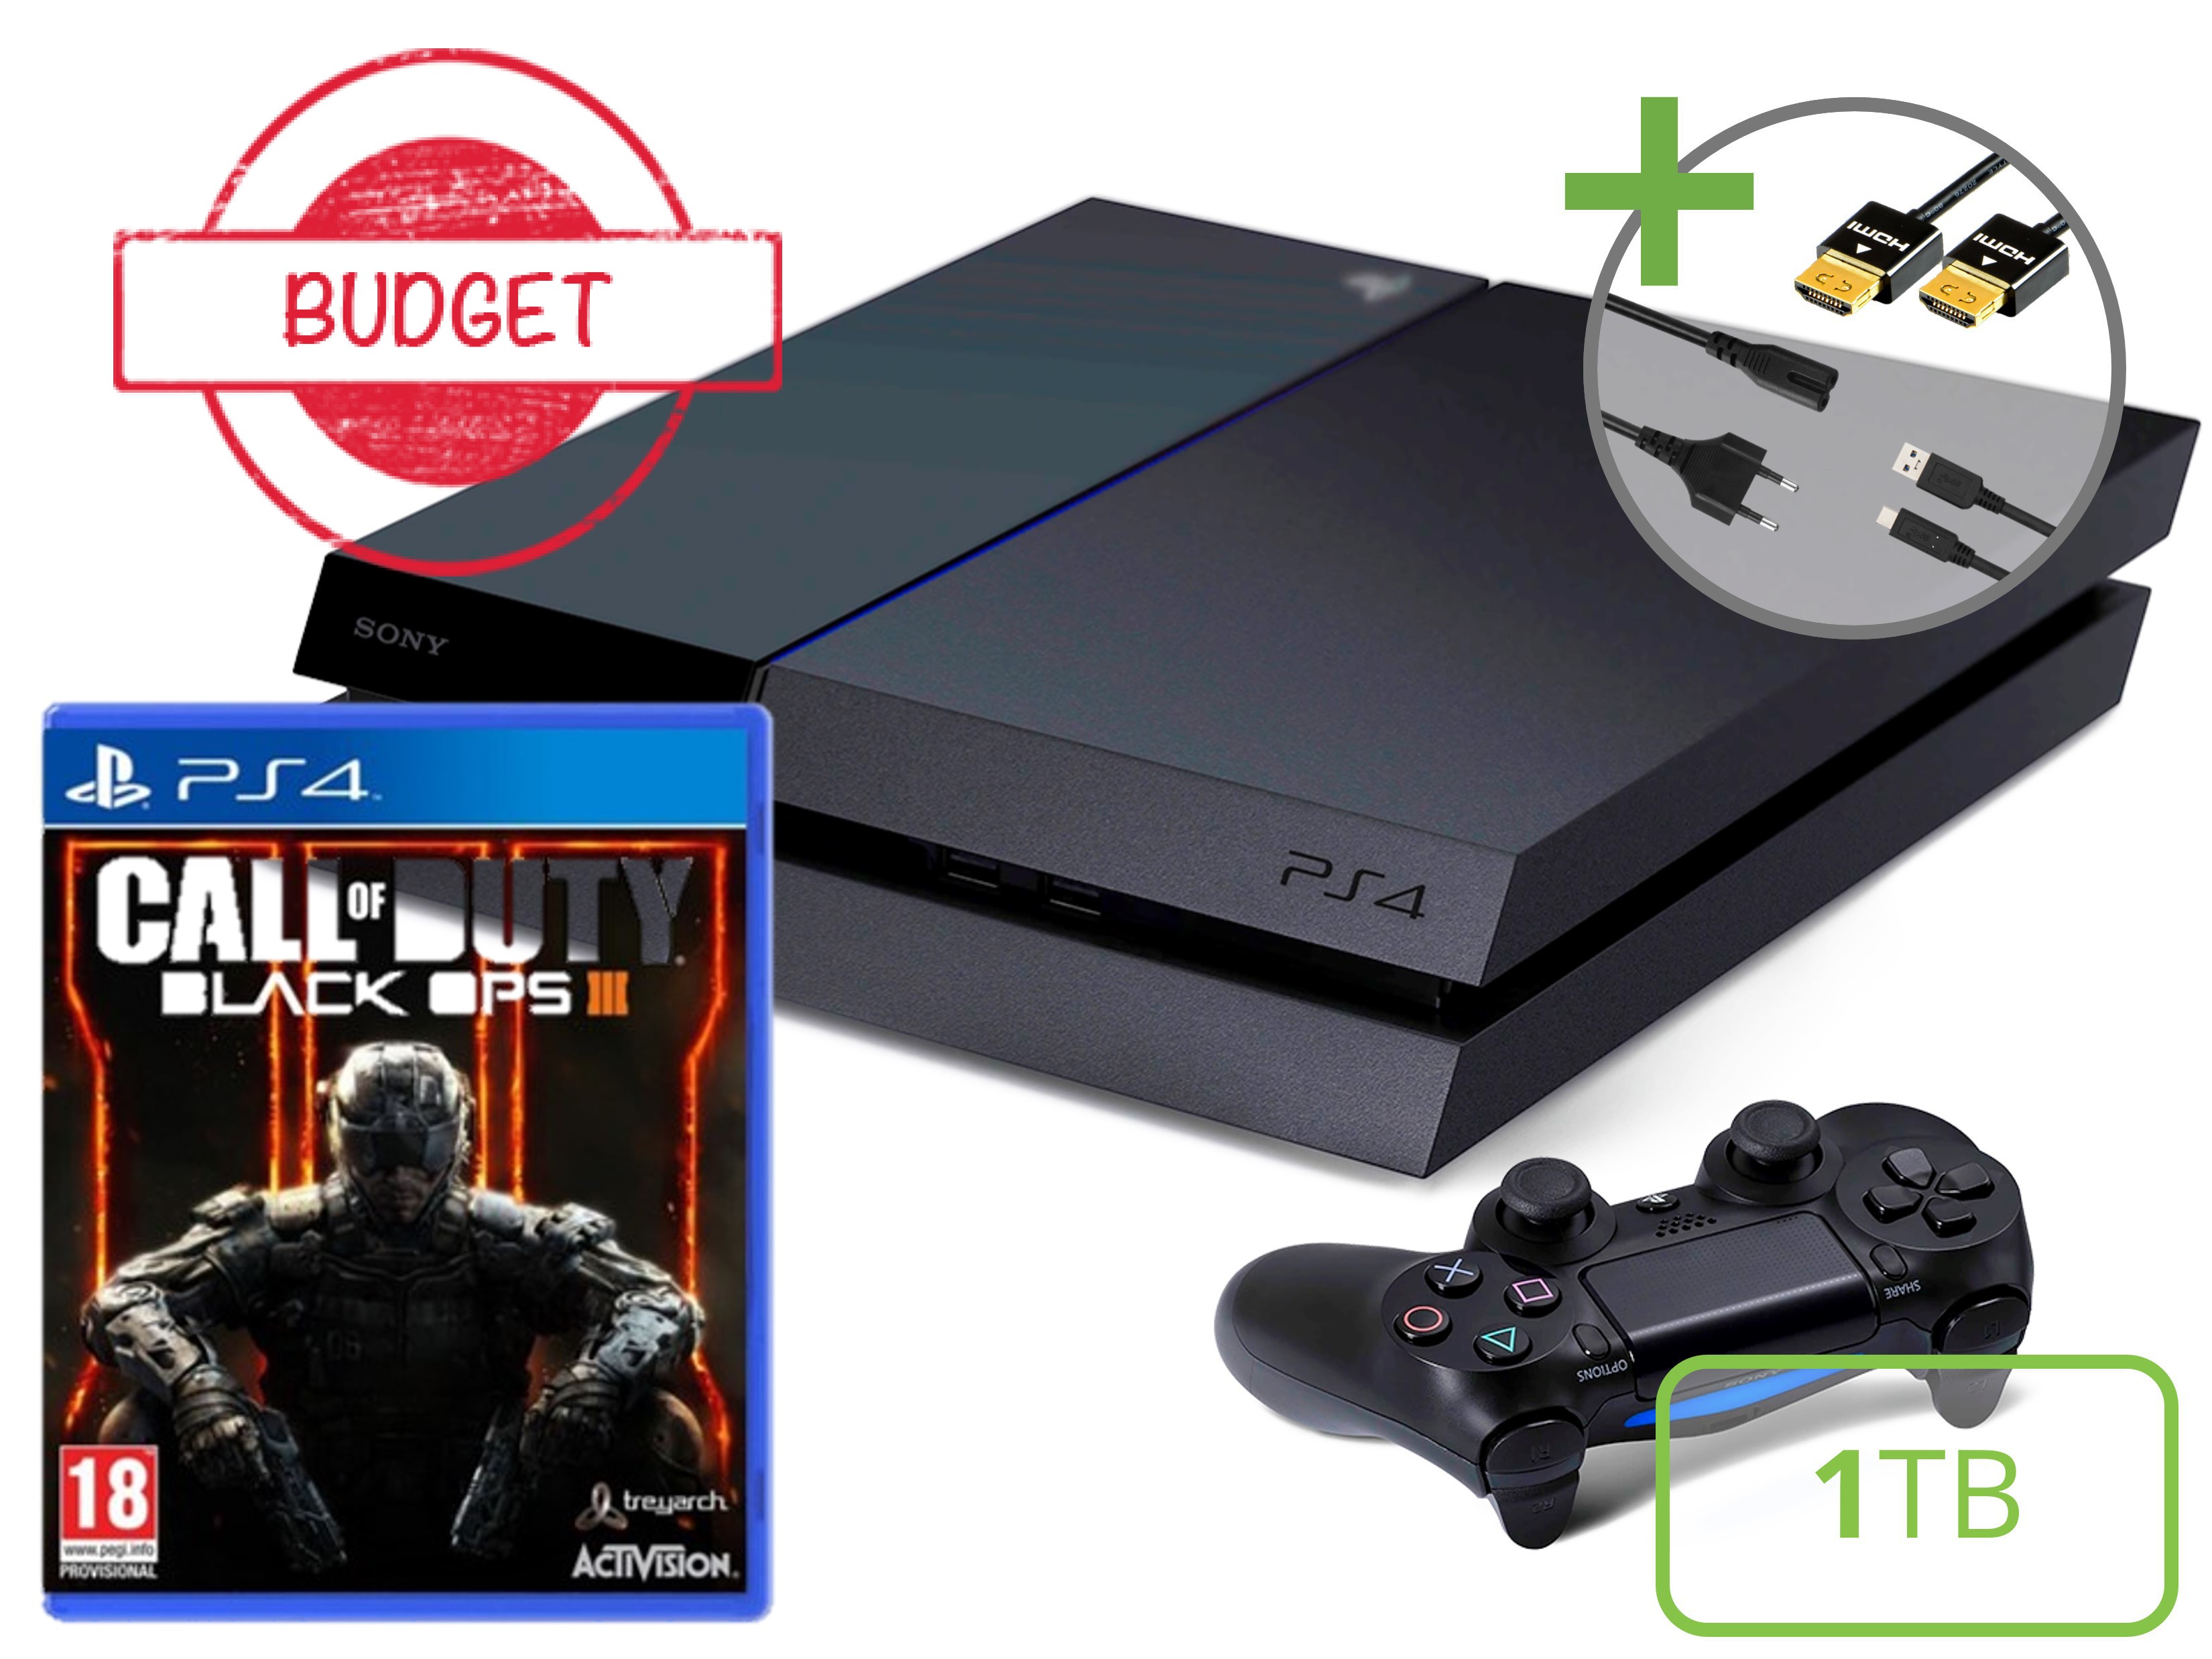 Sony PlayStation 4 Starter Pack - 1TB Call of Duty Black Ops III Edition - Budget - Playstation 4 Hardware